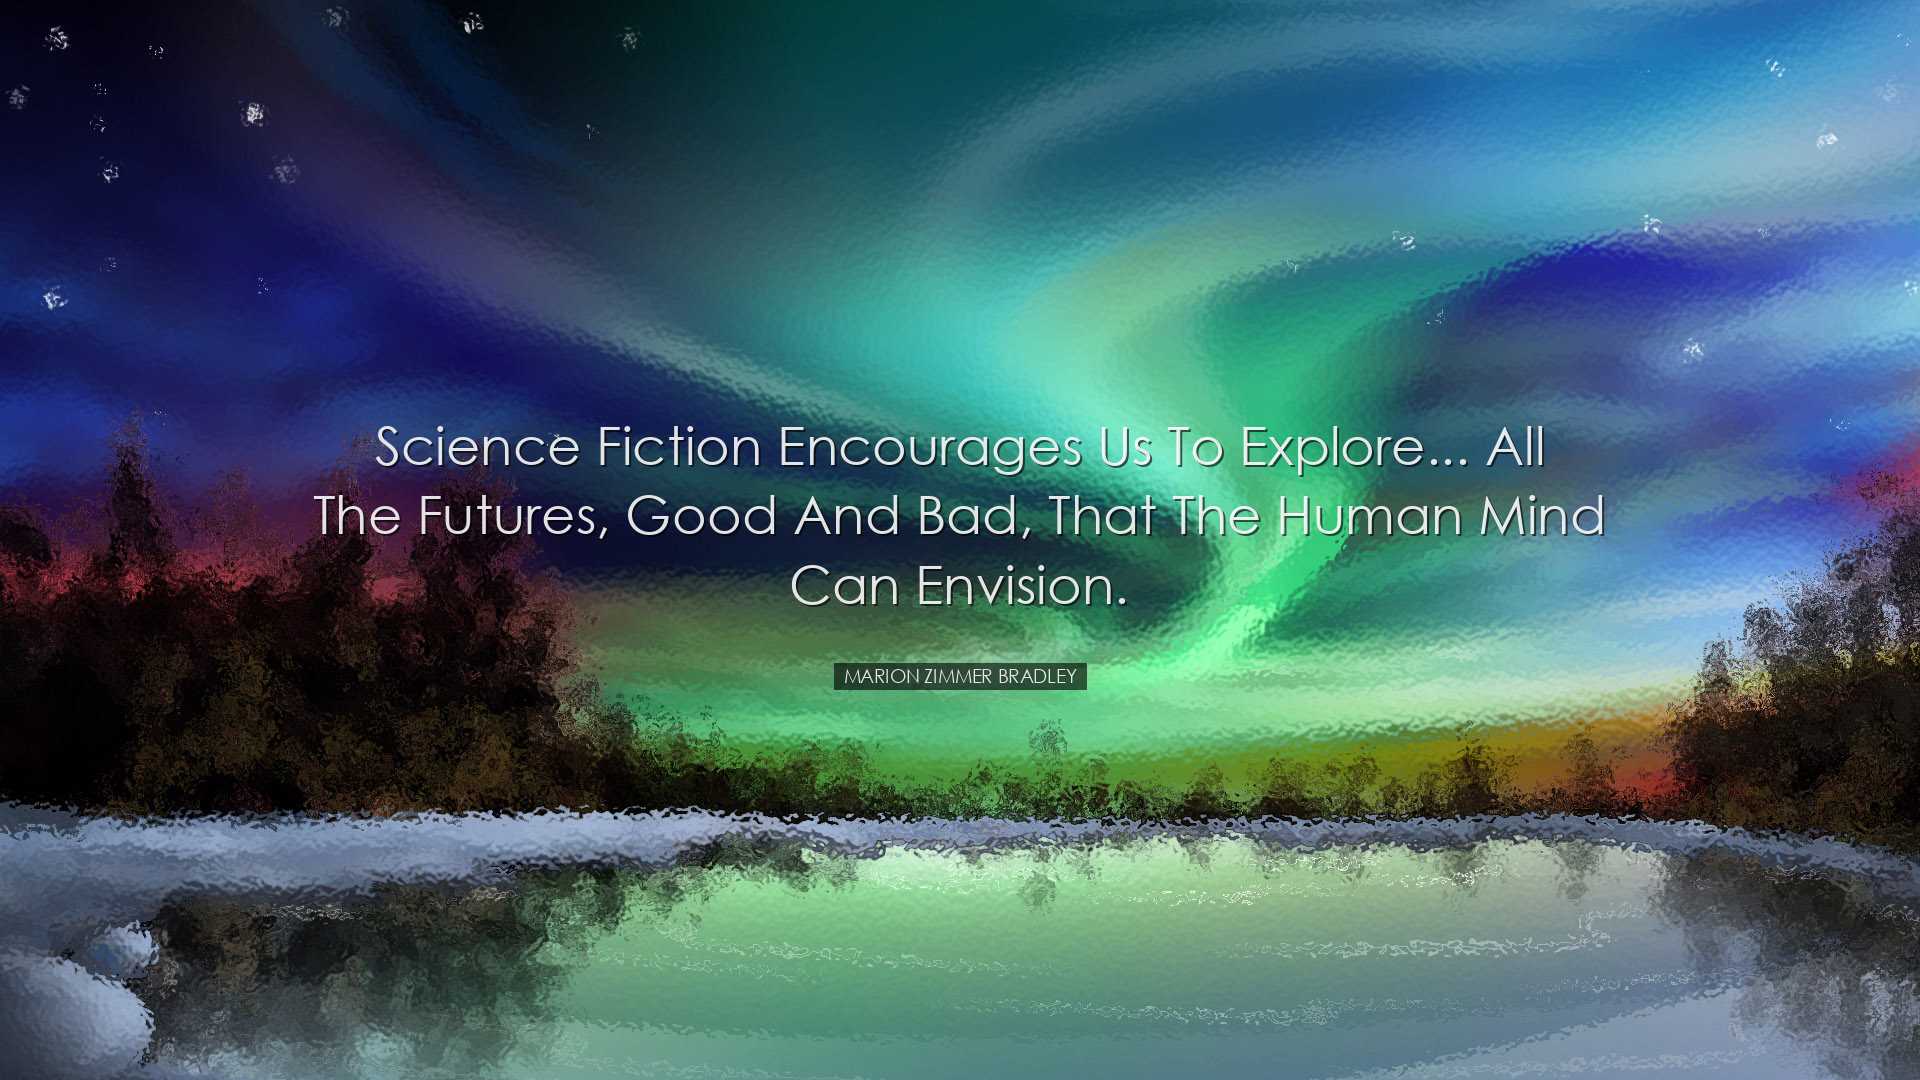 Science fiction encourages us to explore... all the futures, good